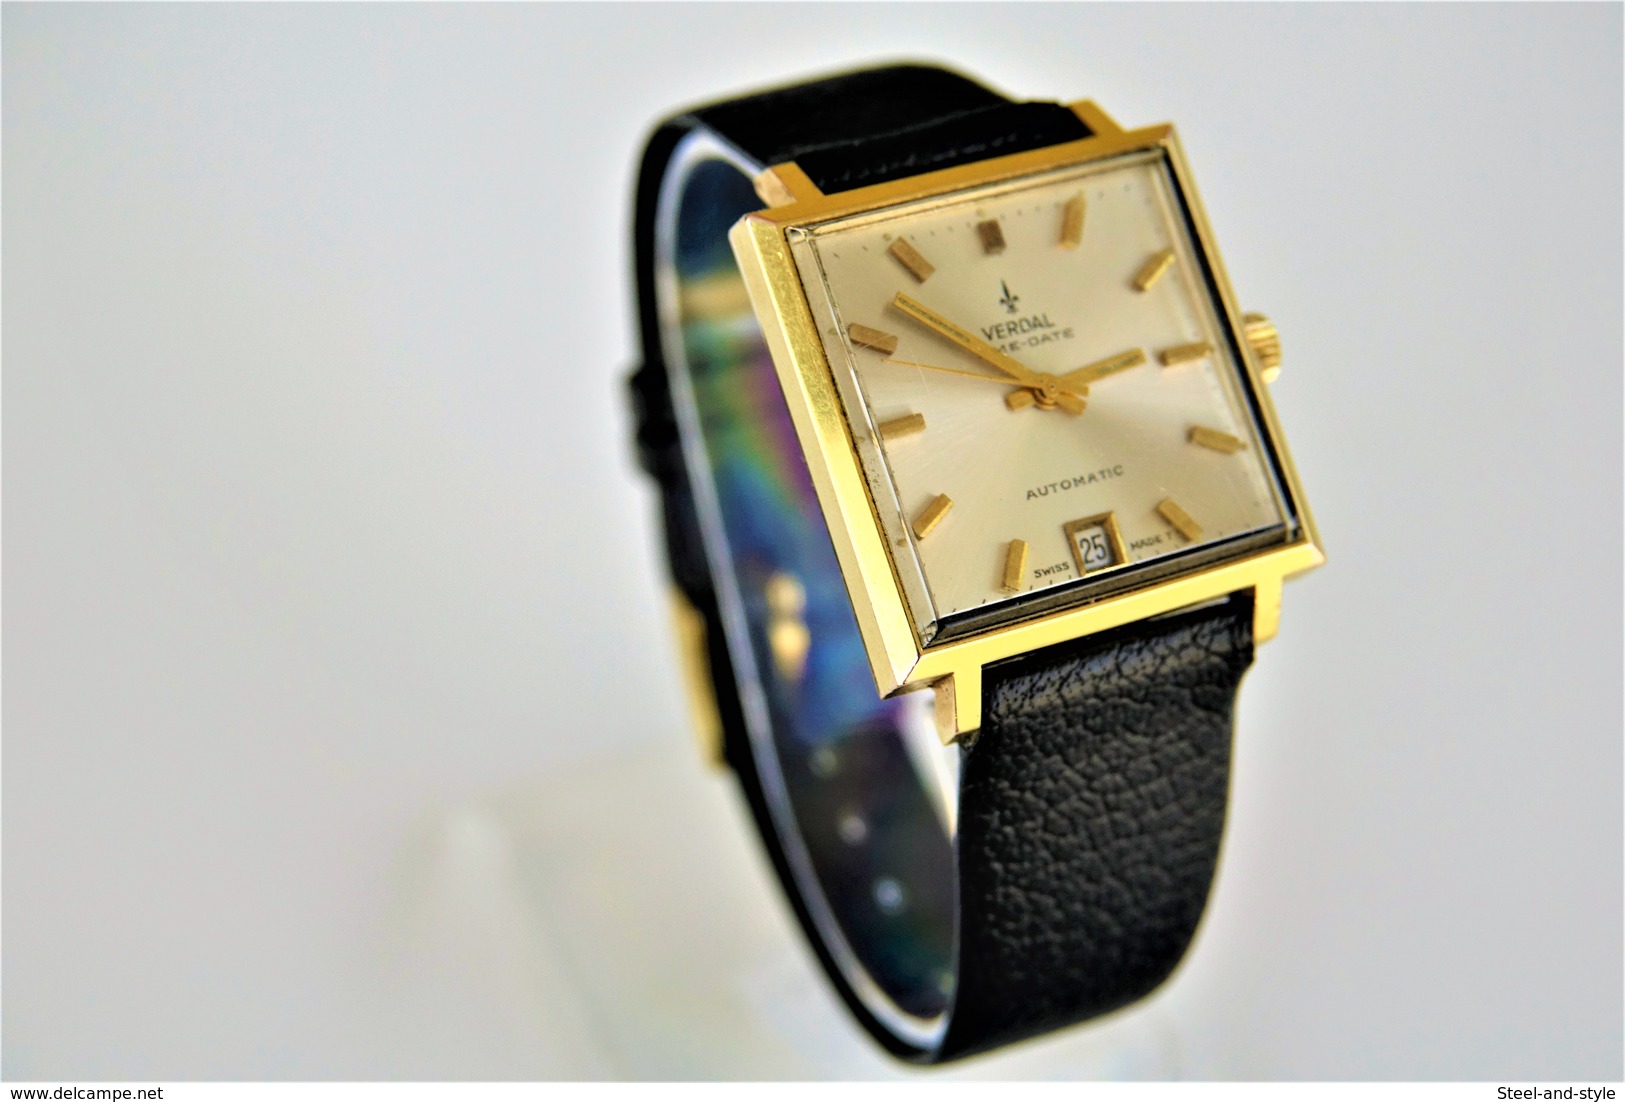 watches : VERDAL TIME-DATE AUTOMATIC RaRe with original box - 20 microns gold plated - original - running - 1970s